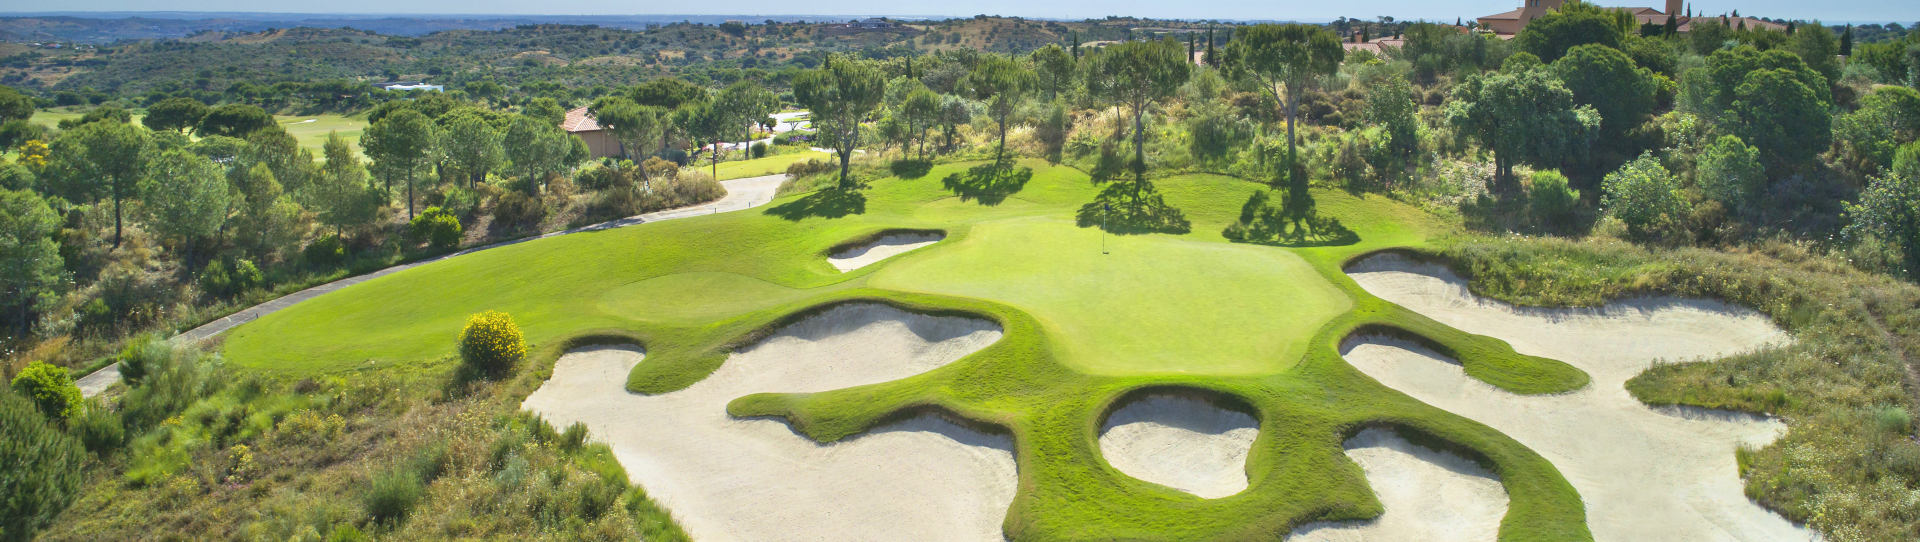 Portugal golf holidays - Monte Rei Golf Duo Experience - Photo 3